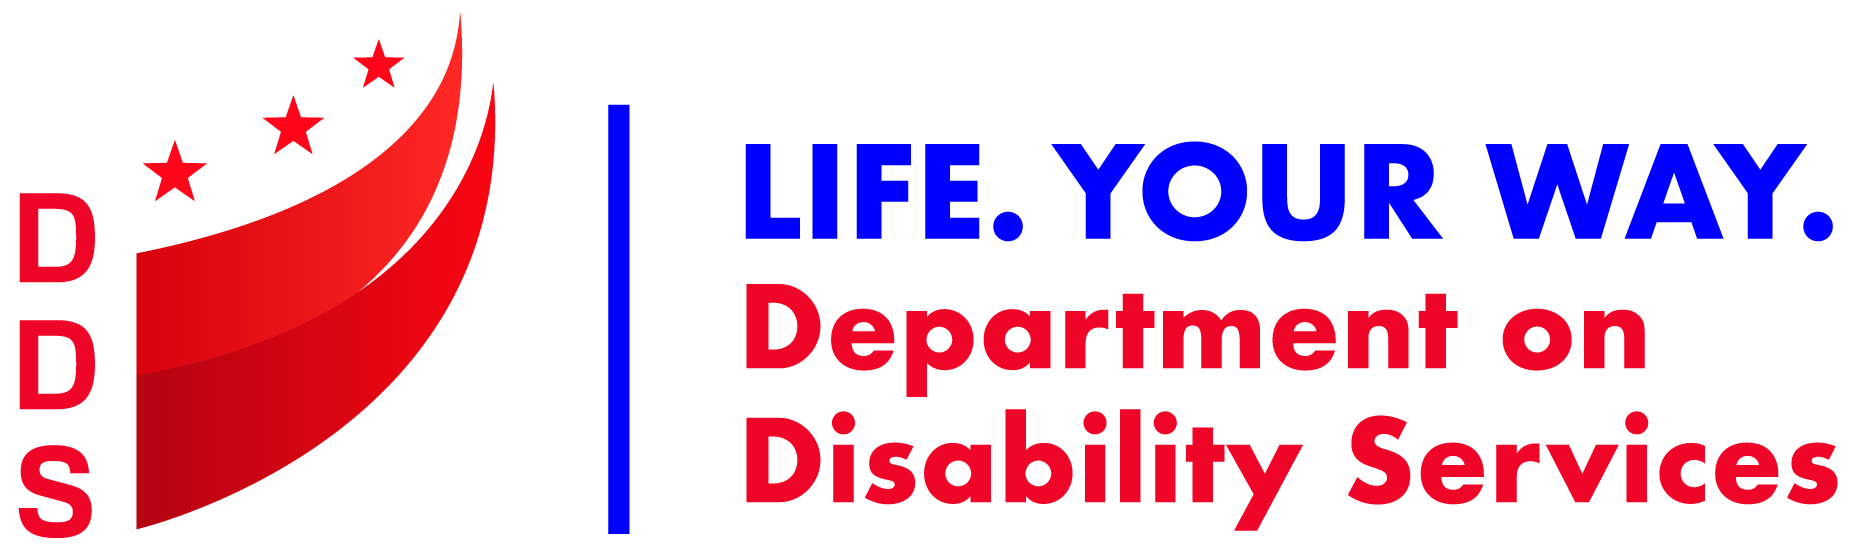 Department of Disability Services Logo